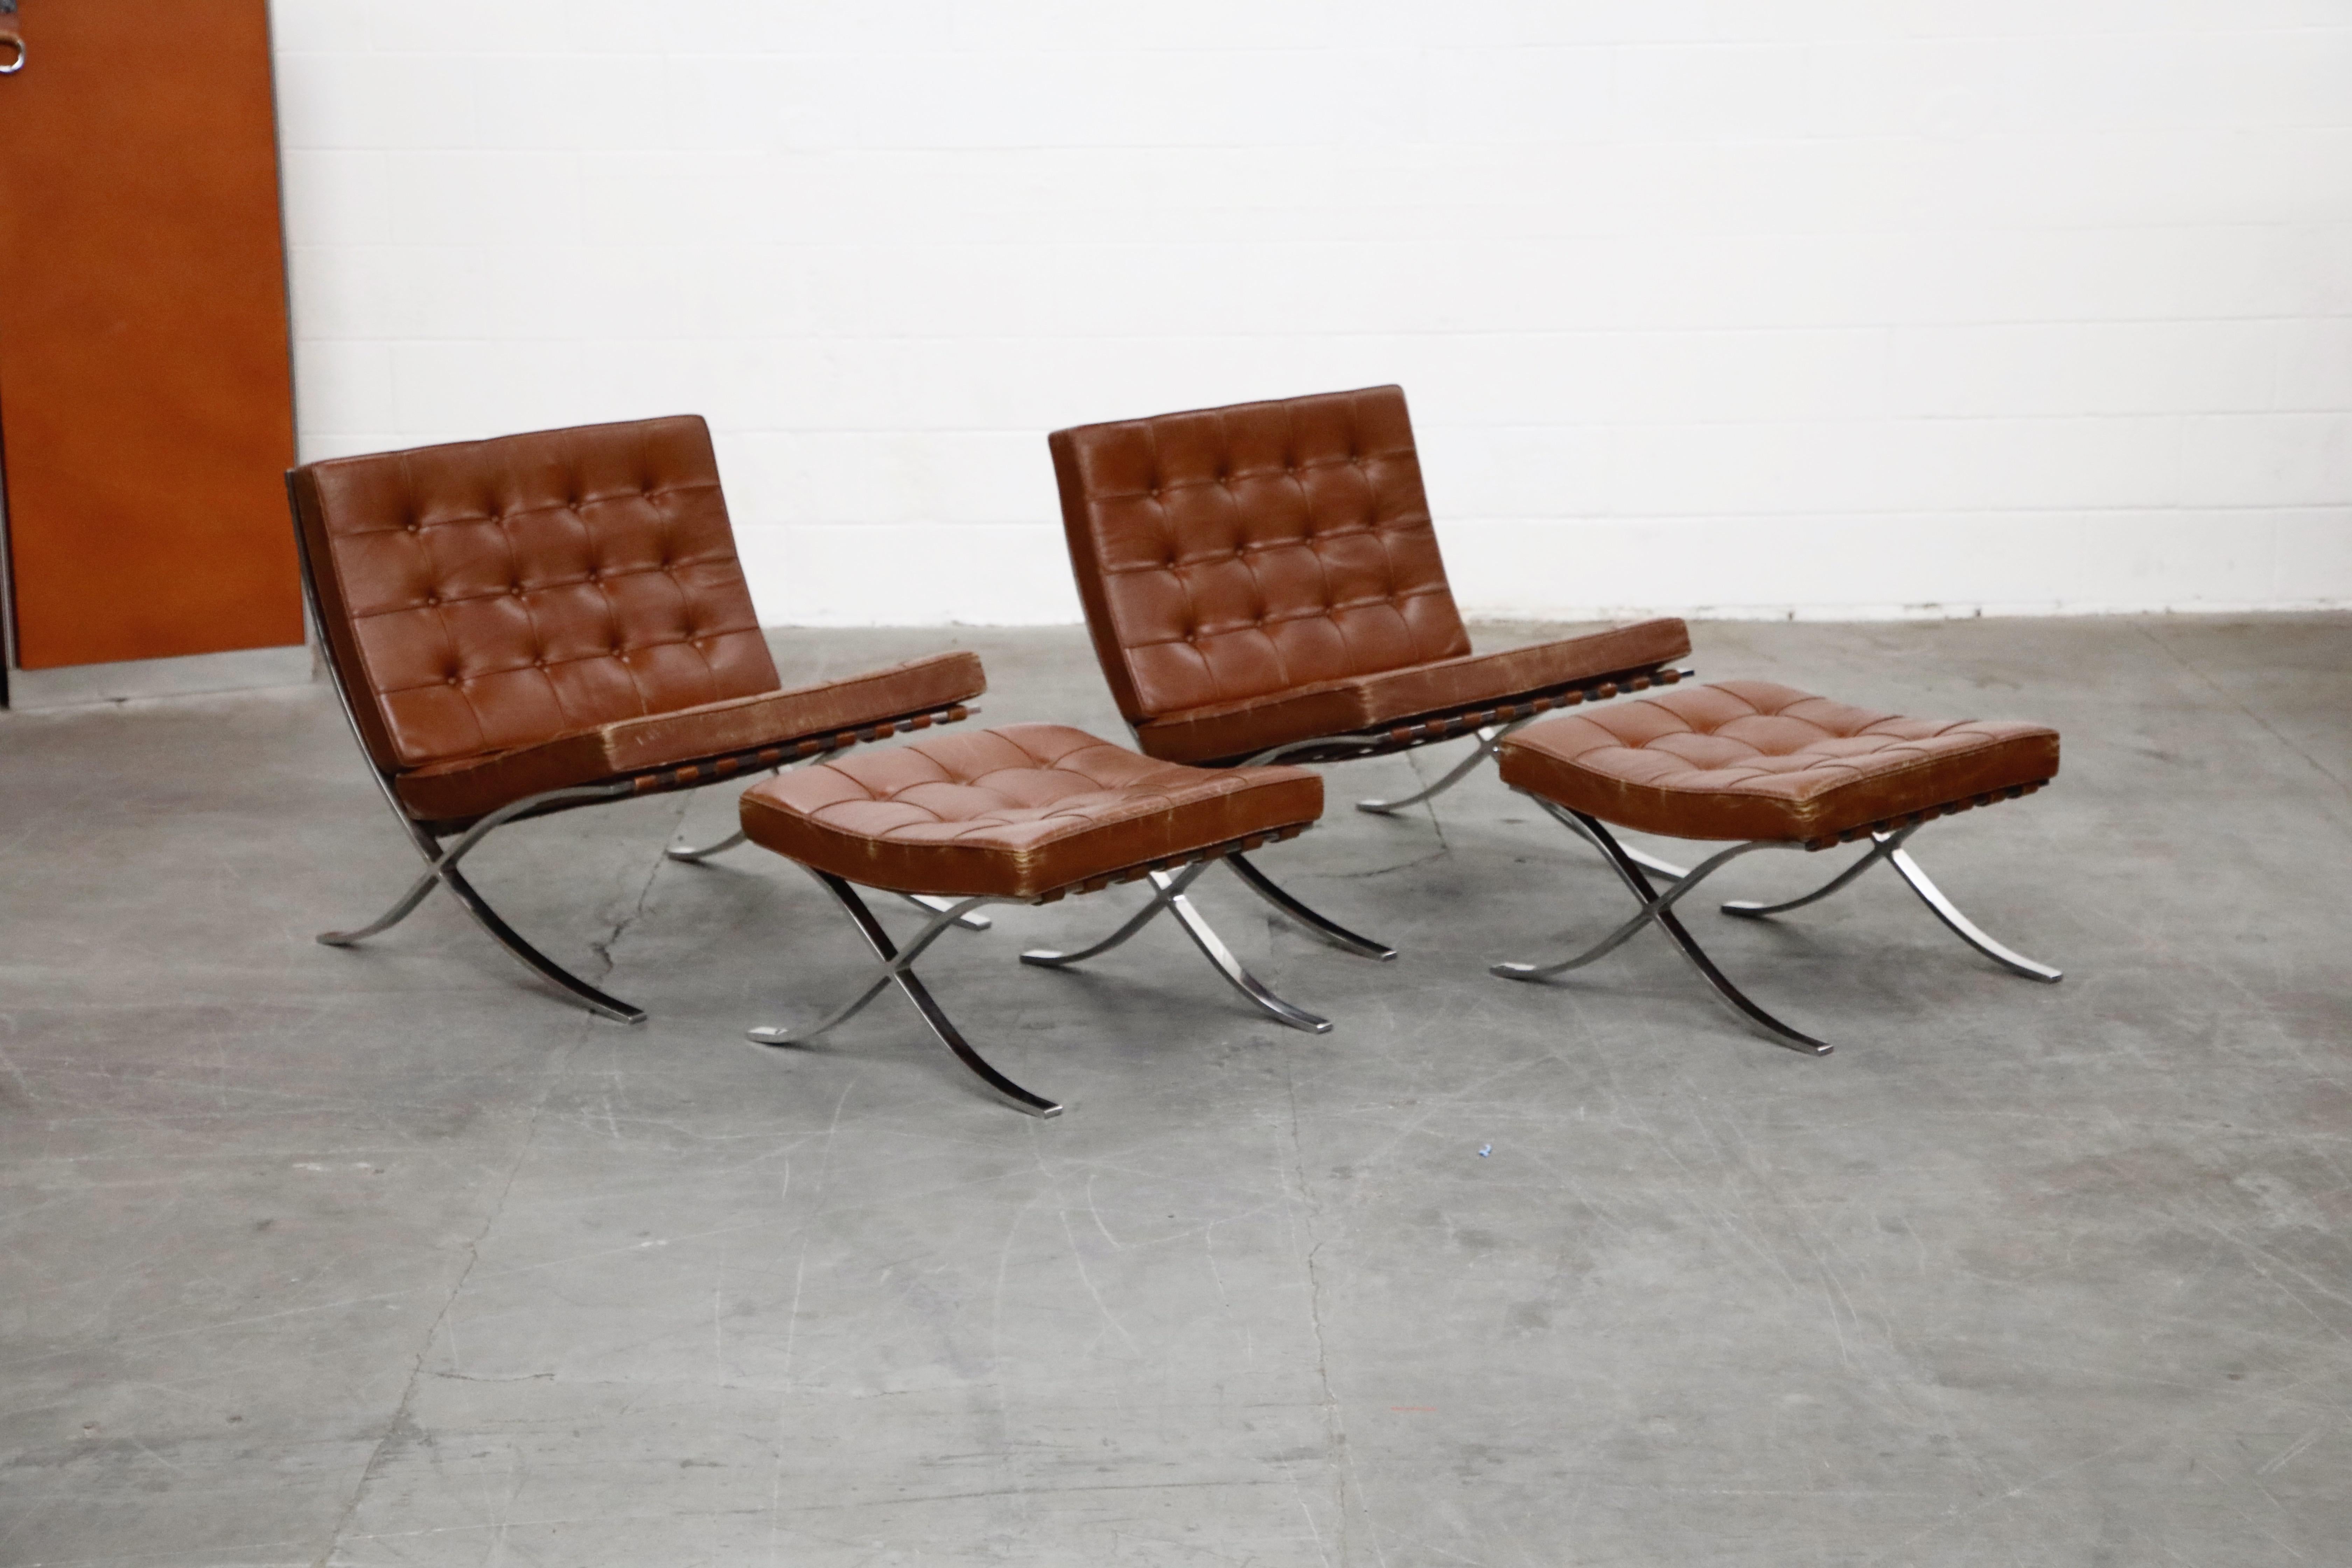 This listing is for a highly sought-after-by-collectors 'Original 1st Generation Production' set of two (2) Triple Signed Knoll Associates Barcelona Chairs with two (2) matching Ottomans by Ludwig Mies van der Rohe, circa 1961 in original deep brown